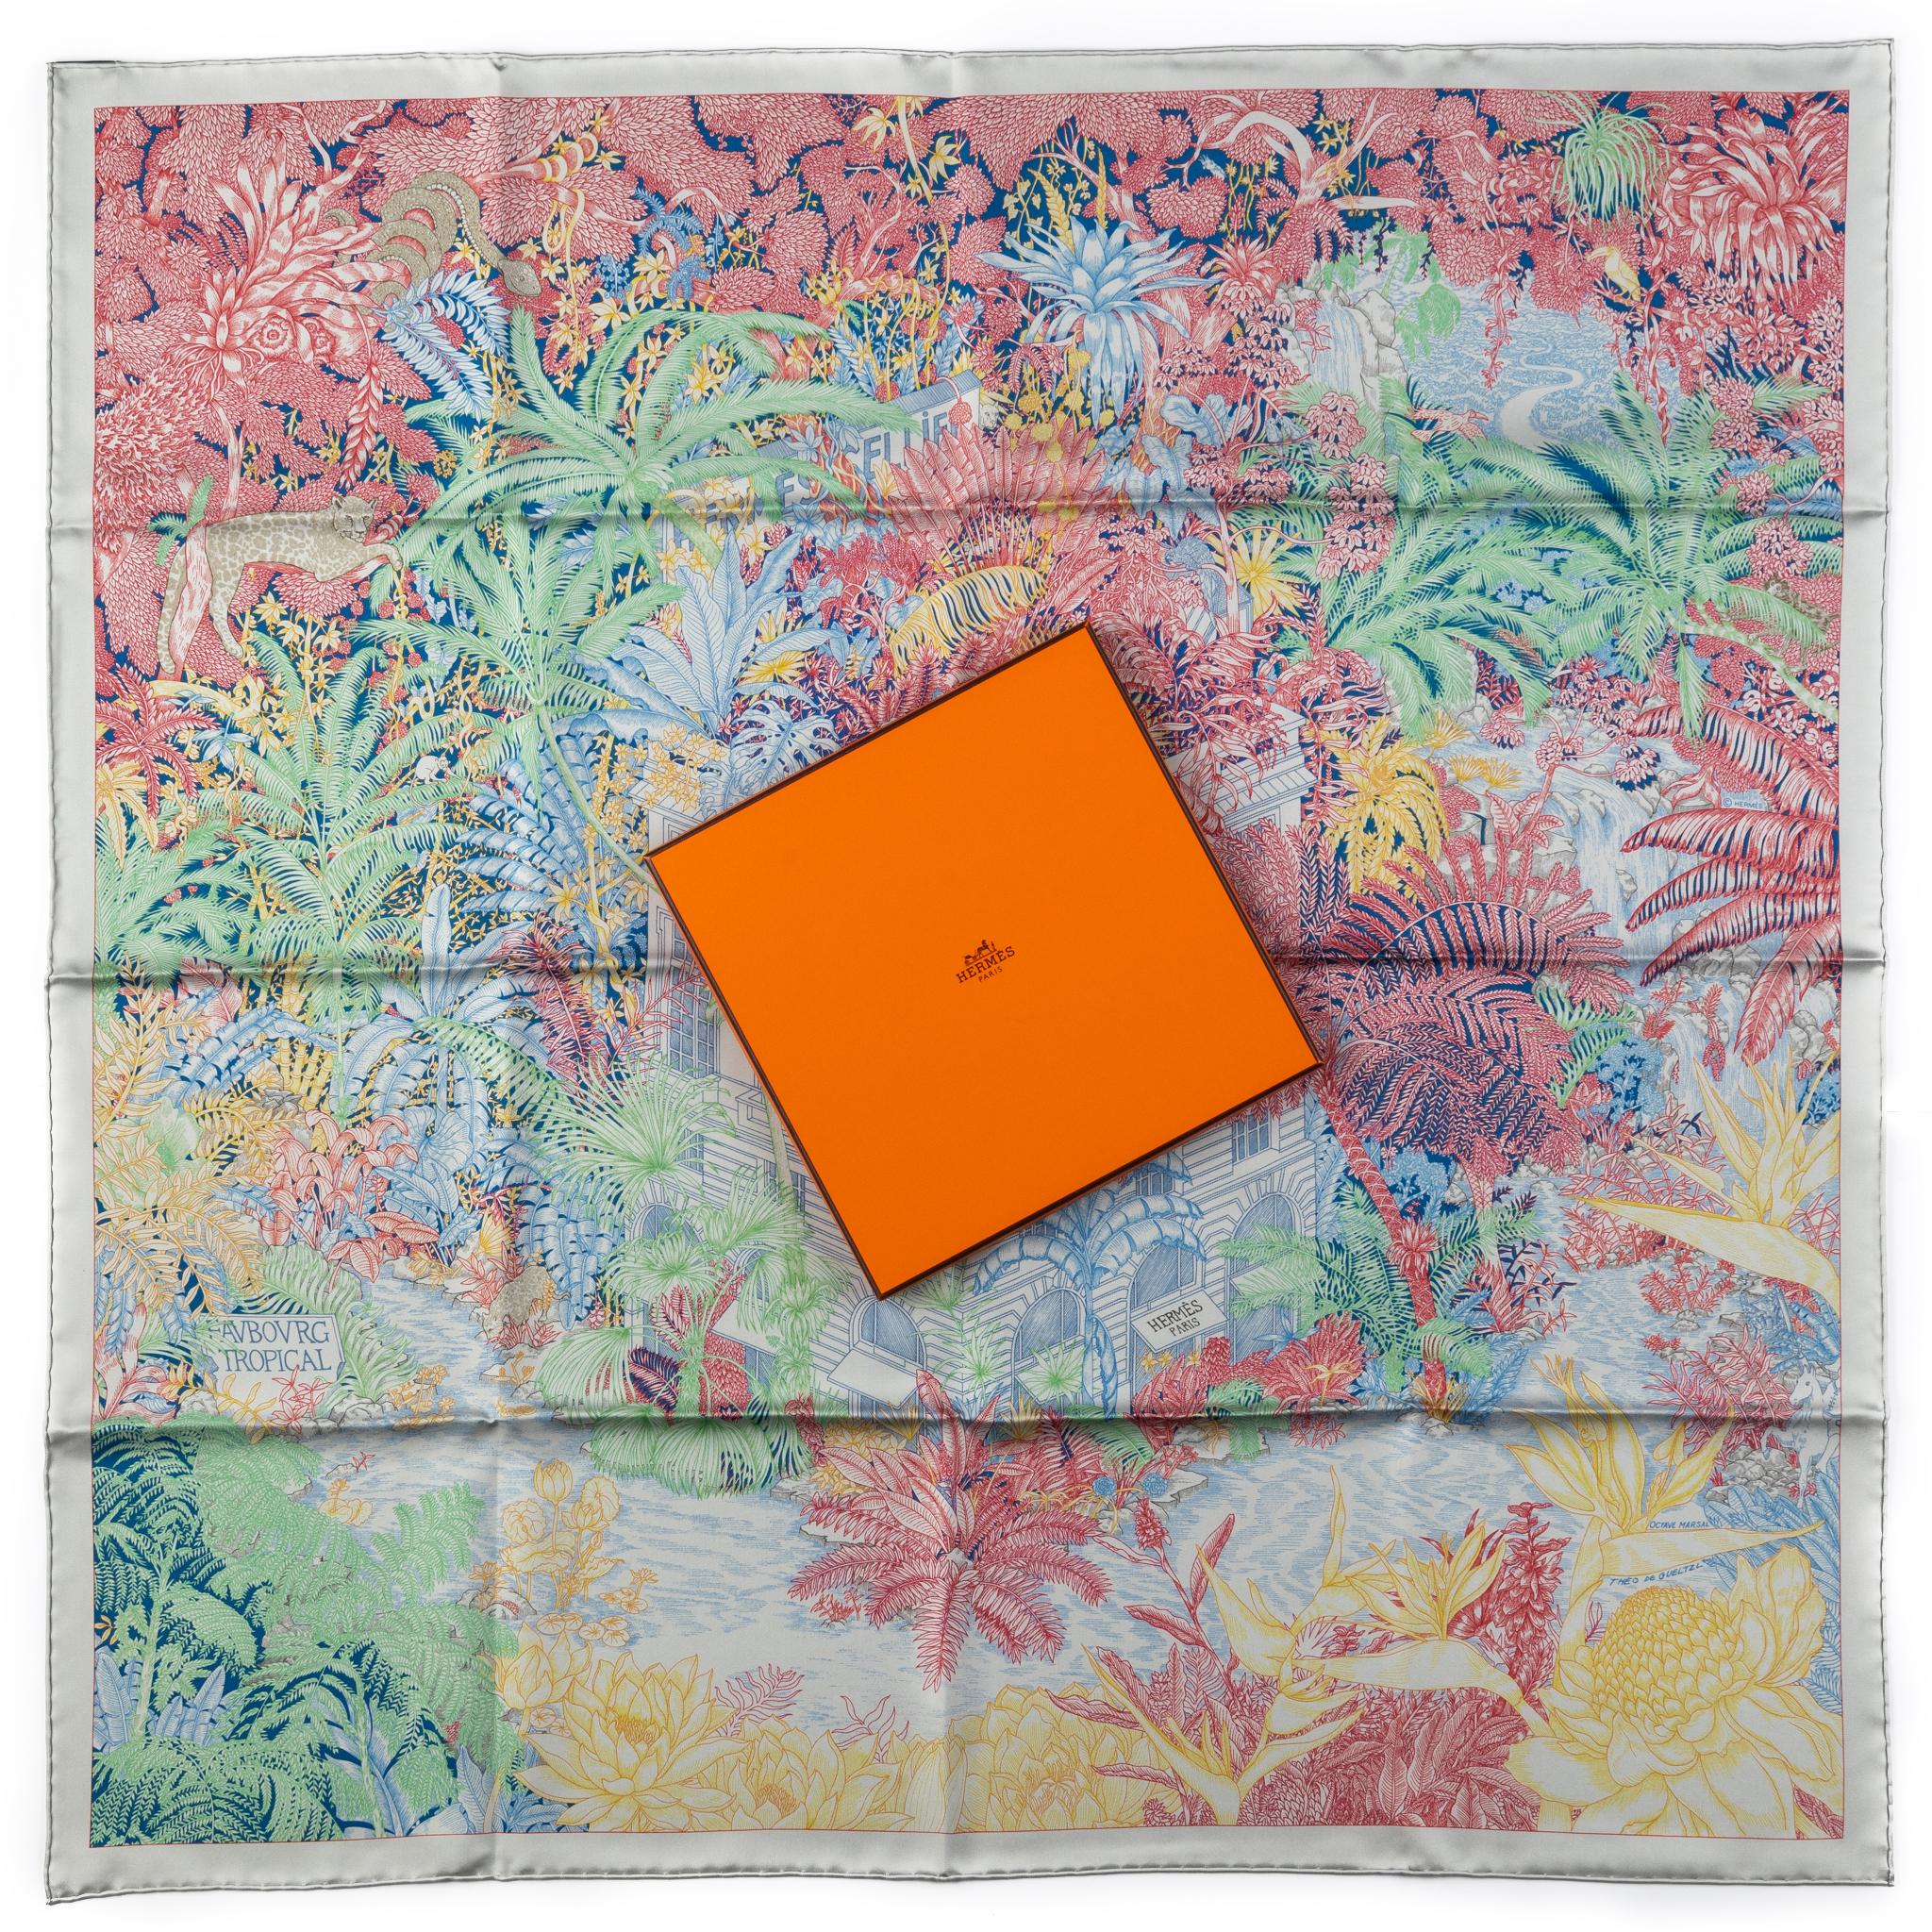 Hermès collectible tropical garden multicolor silk scarf. Hand-rolled edges. New in box.